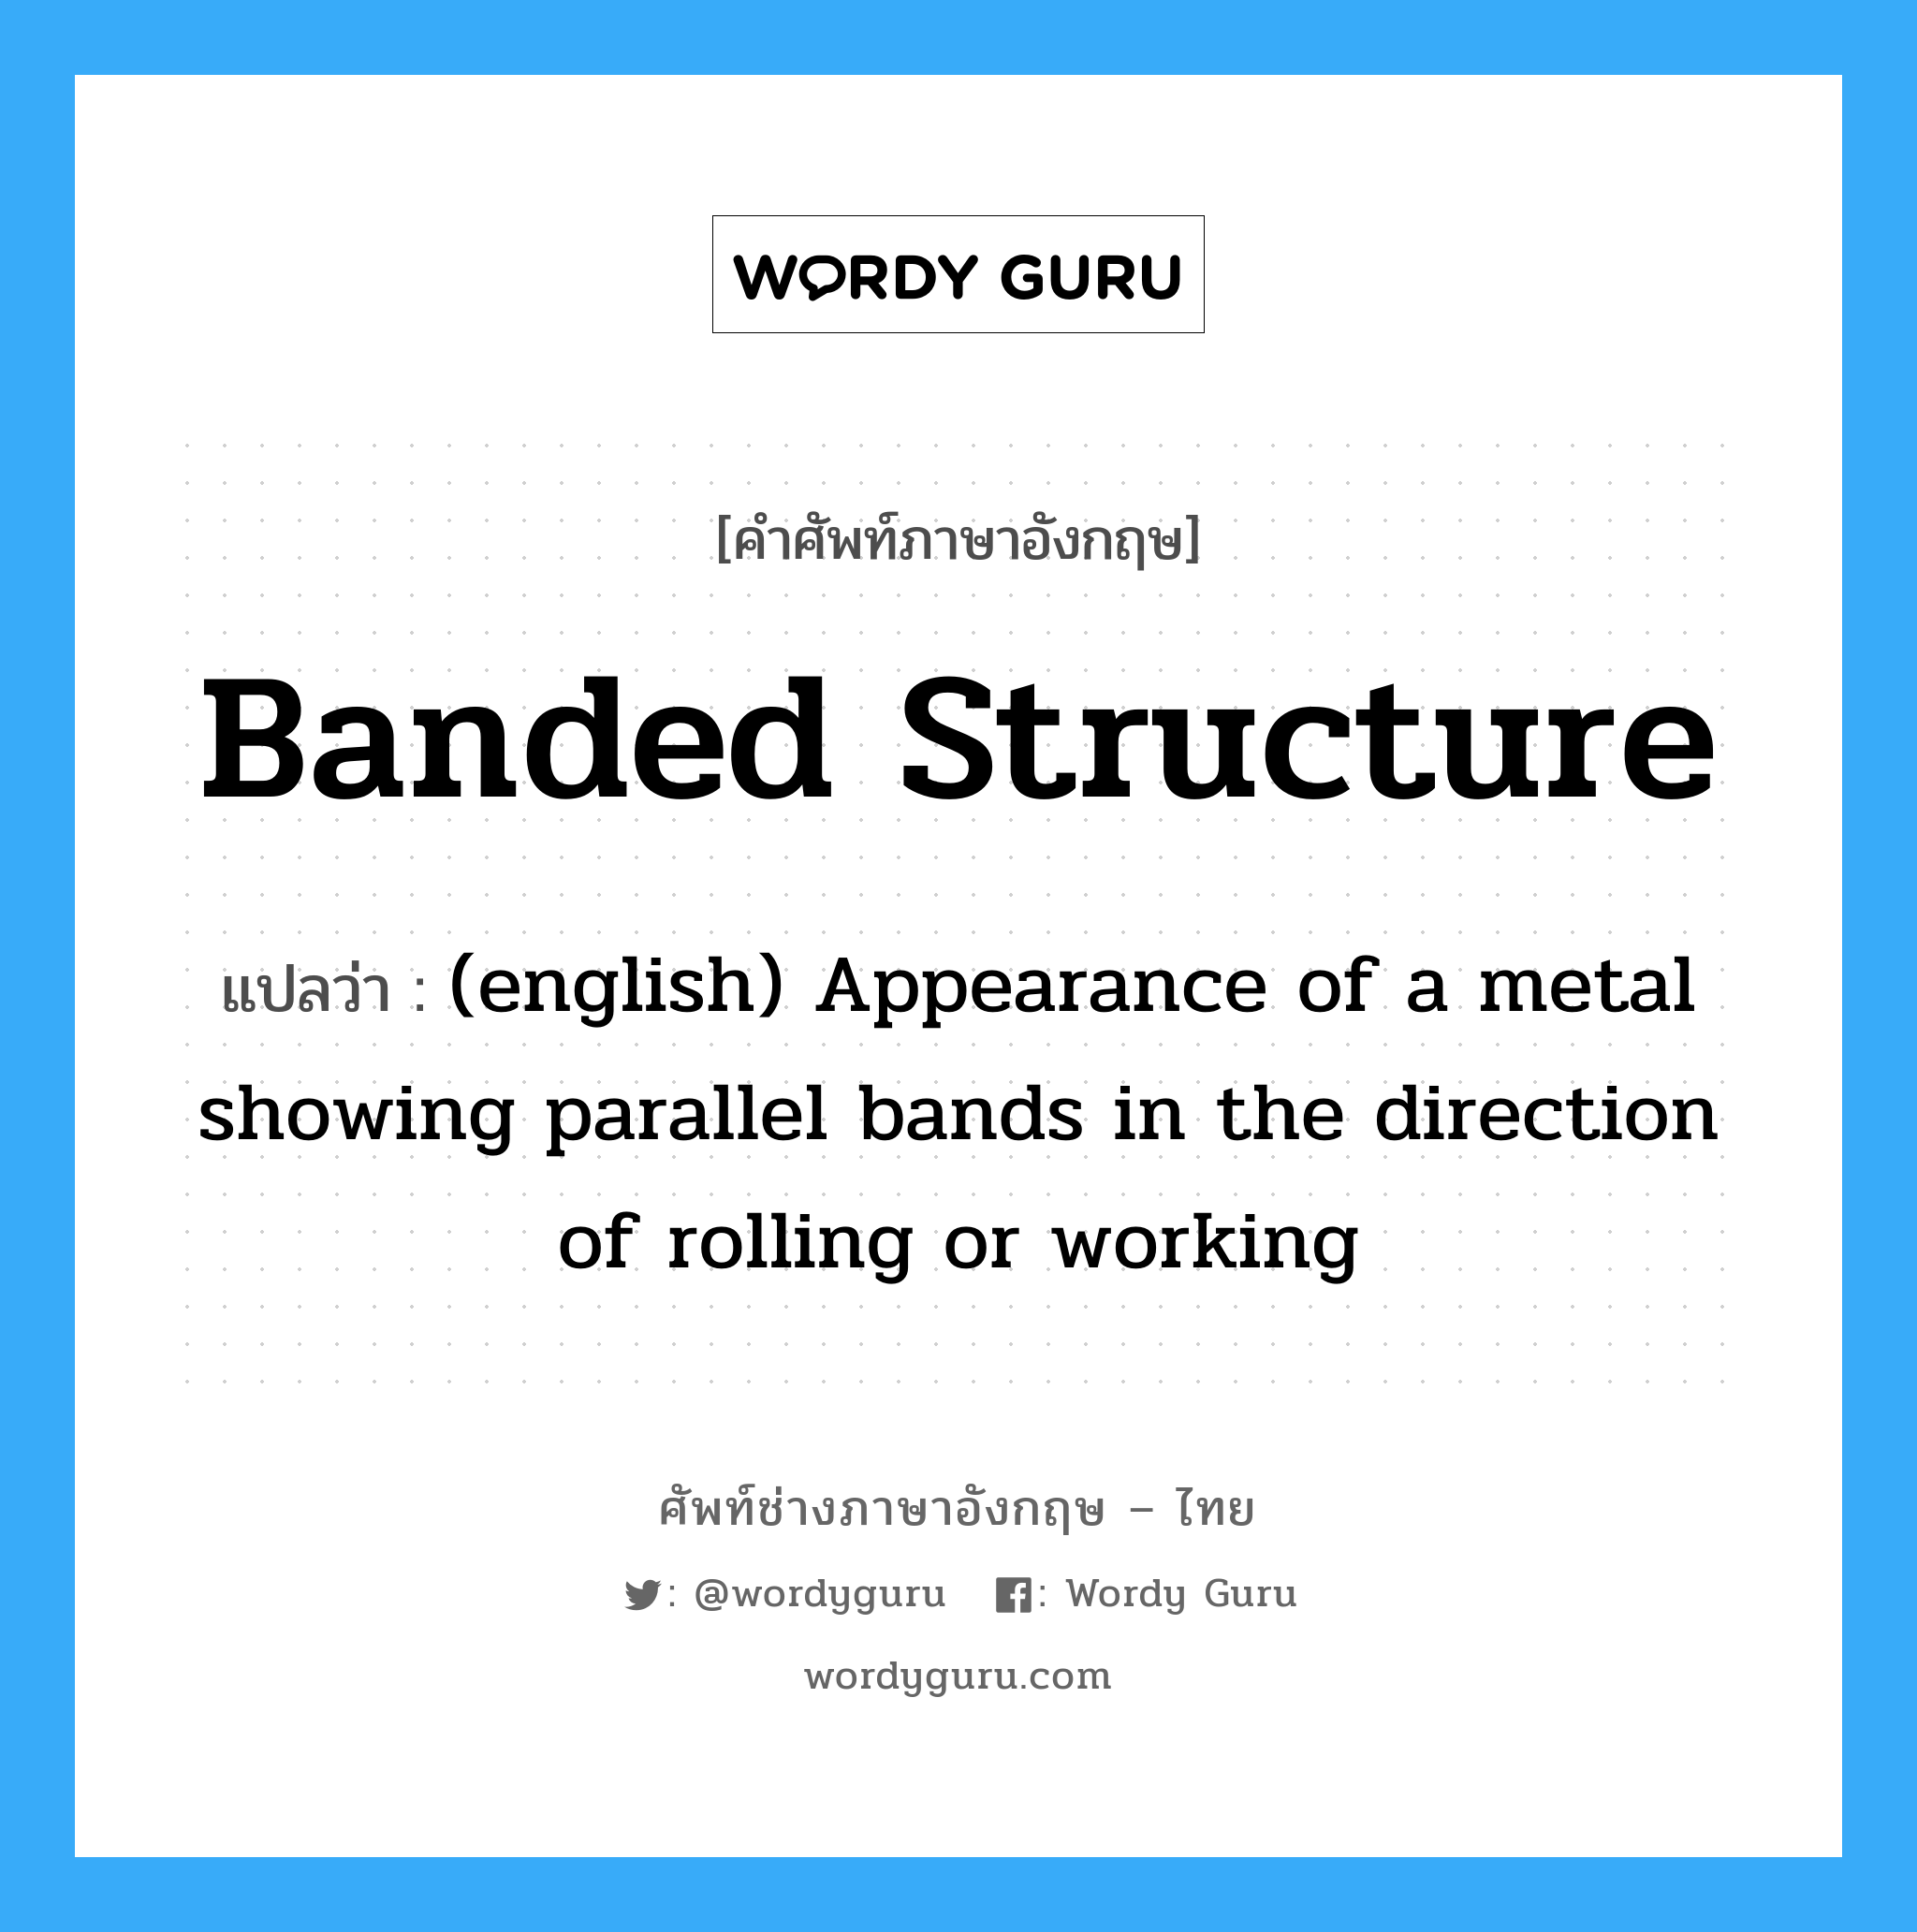 Banded Structure แปลว่า?, คำศัพท์ช่างภาษาอังกฤษ - ไทย Banded Structure คำศัพท์ภาษาอังกฤษ Banded Structure แปลว่า (english) Appearance of a metal showing parallel bands in the direction of rolling or working